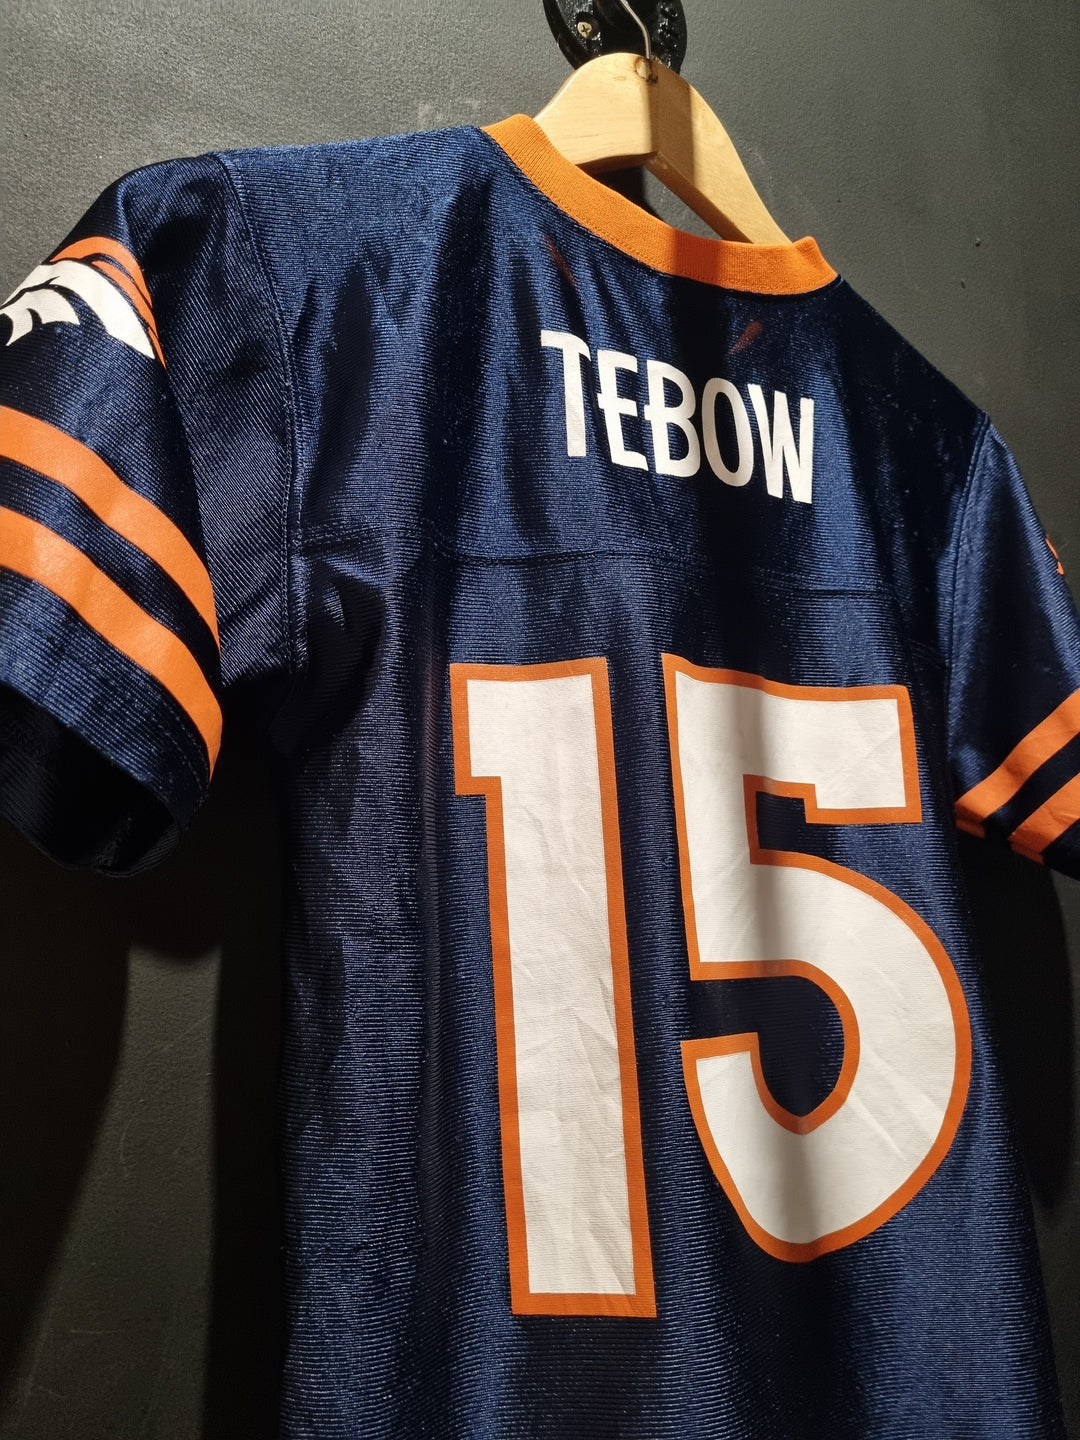 Broncos Tebow Youth L 12/14